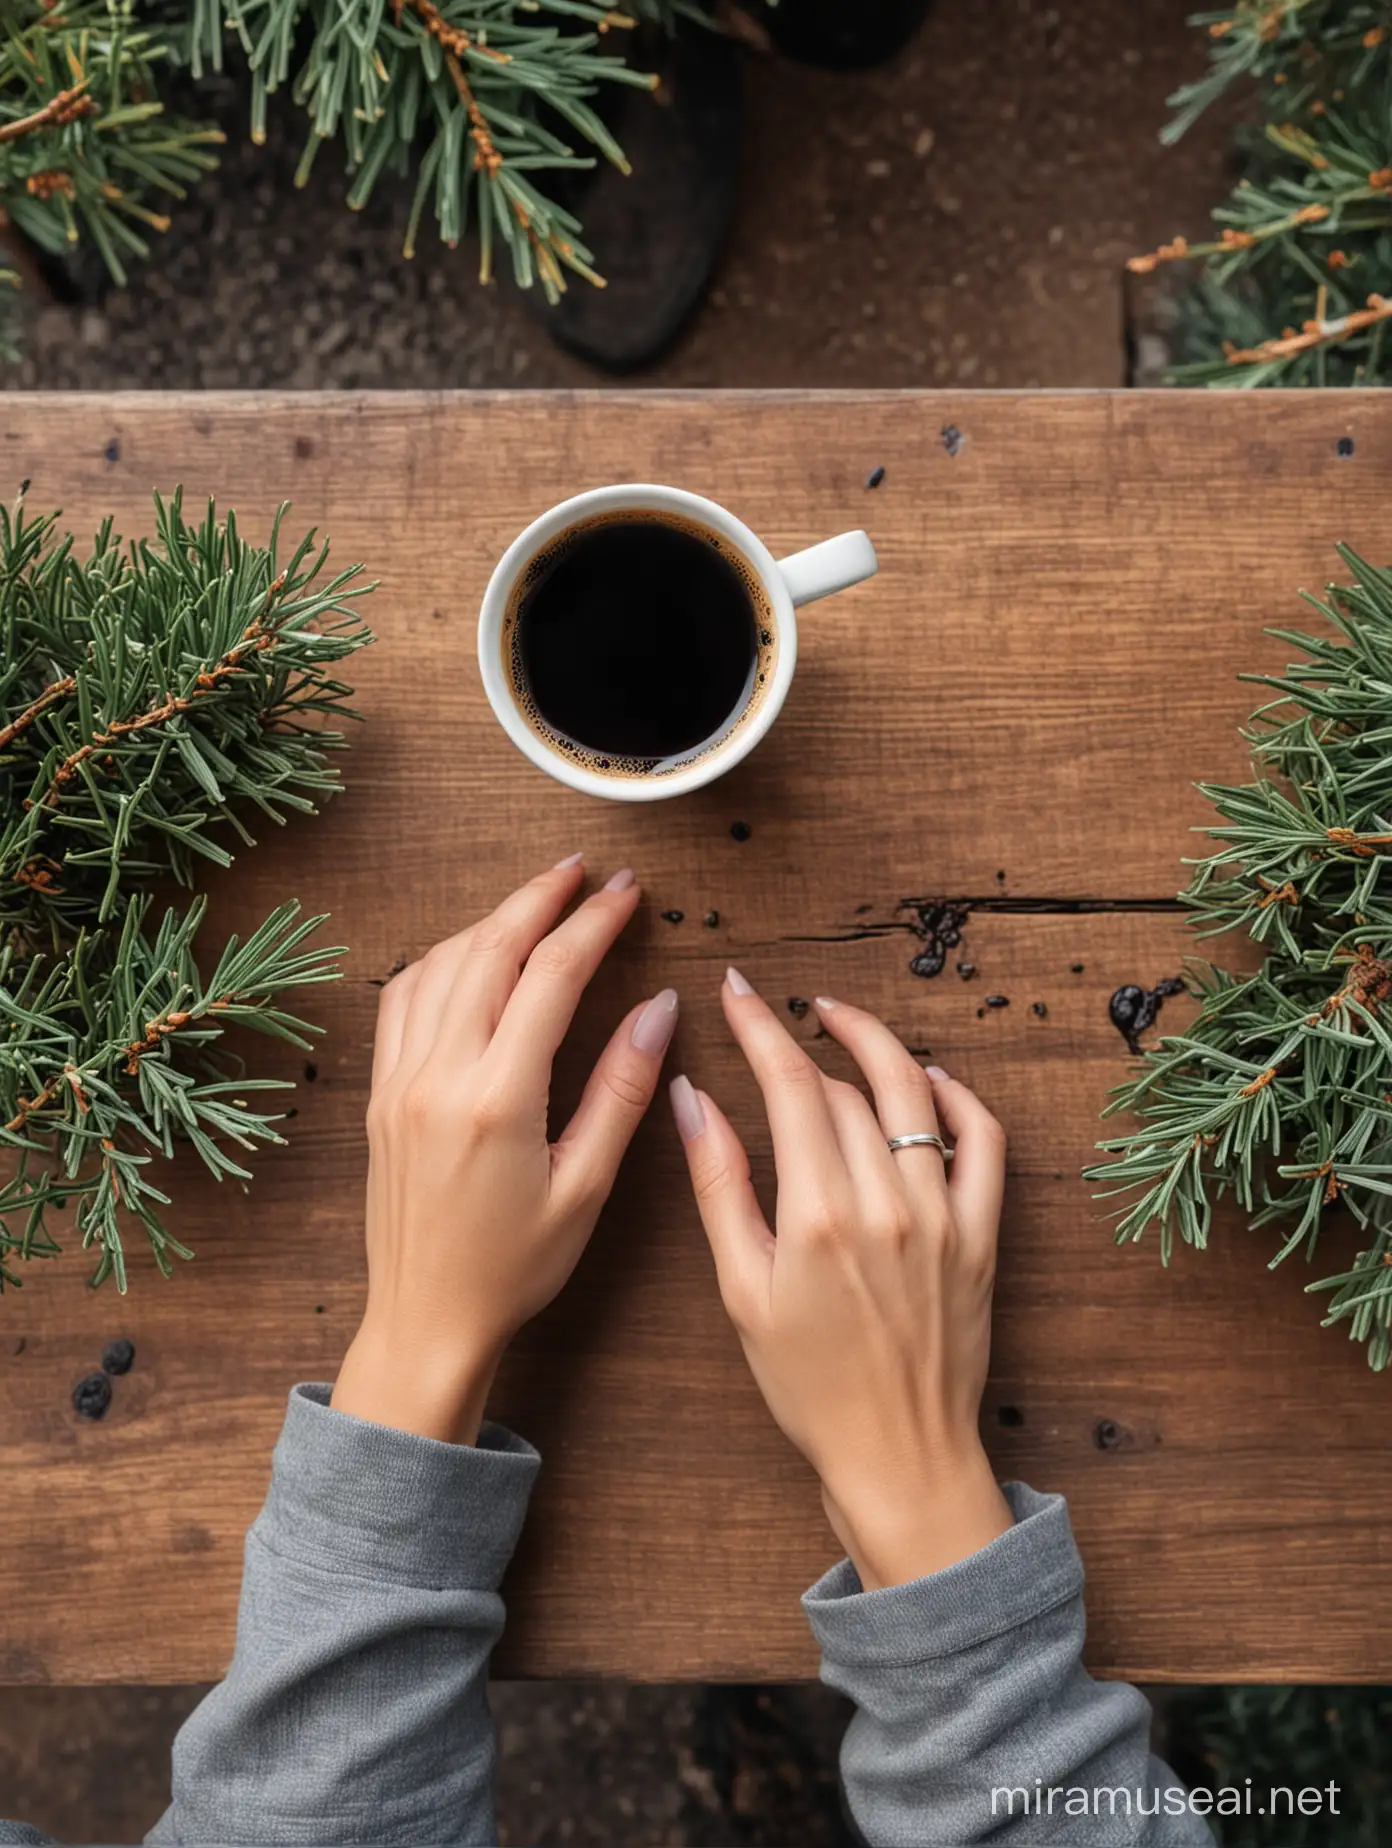 Above view, woman hands hold a coffee cup in a wooden table, with steaming hot black coffee, in an outdoor coffee shop, with pine trees in the background